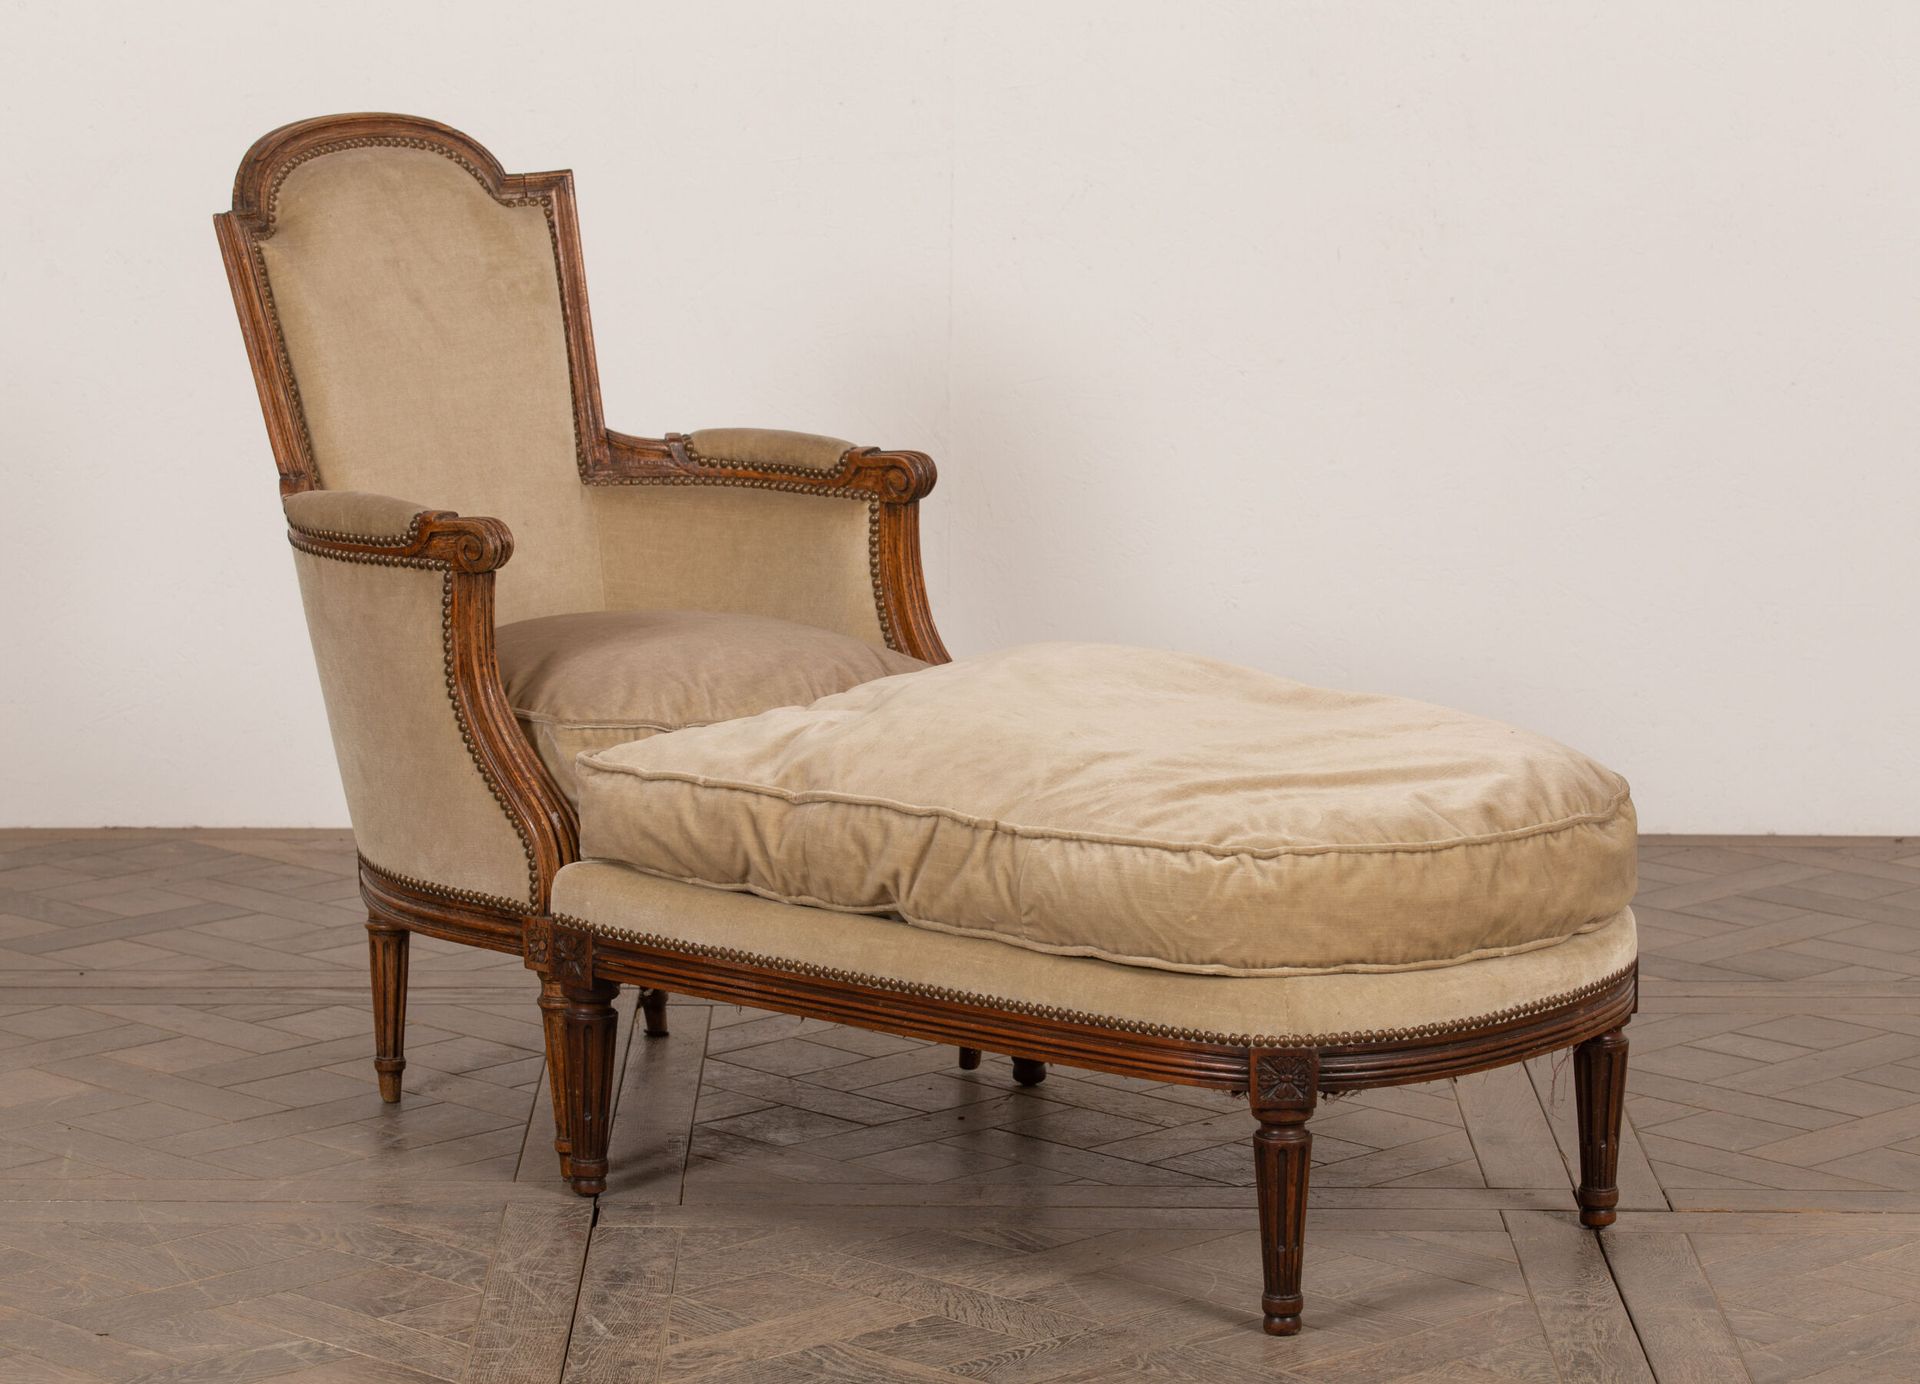 Null Duchesse brisée in molded and carved walnut.
Louis XVI style, late 19th cen&hellip;